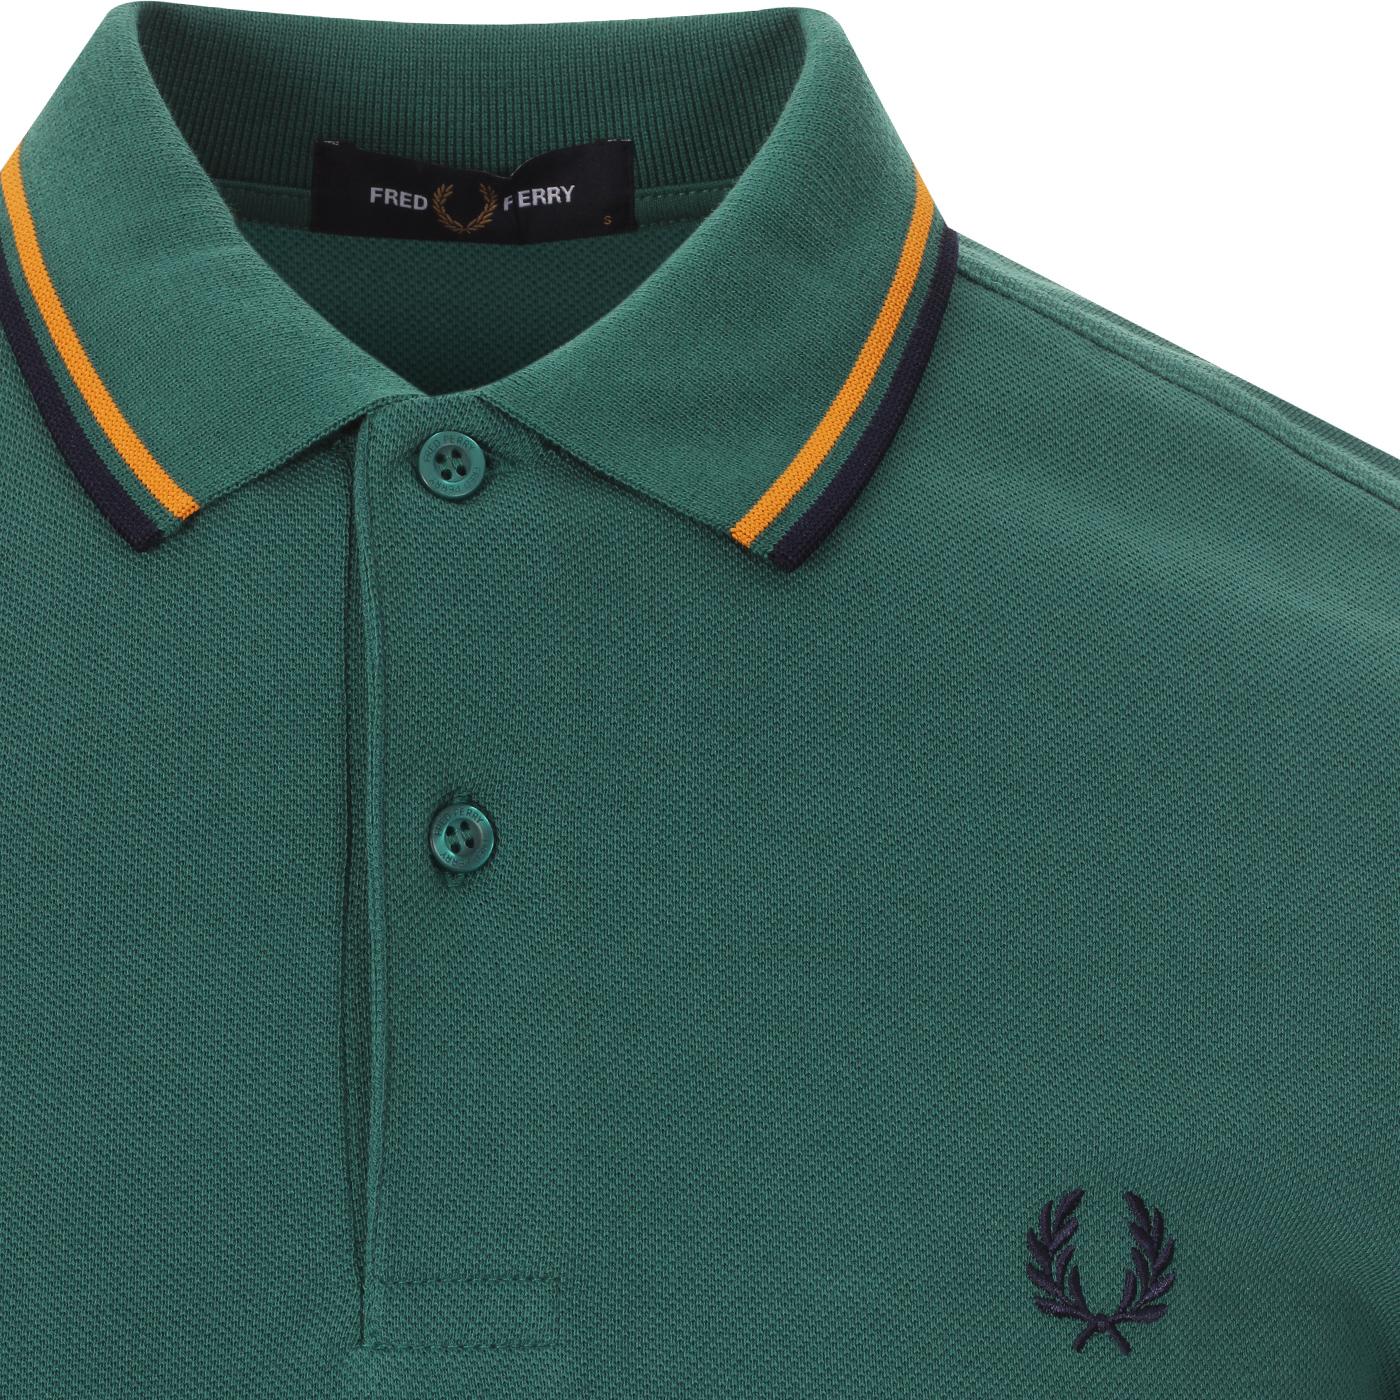 FRED PERRY M3600 Twin Tipped Mod Polo Shirt Bottle Green